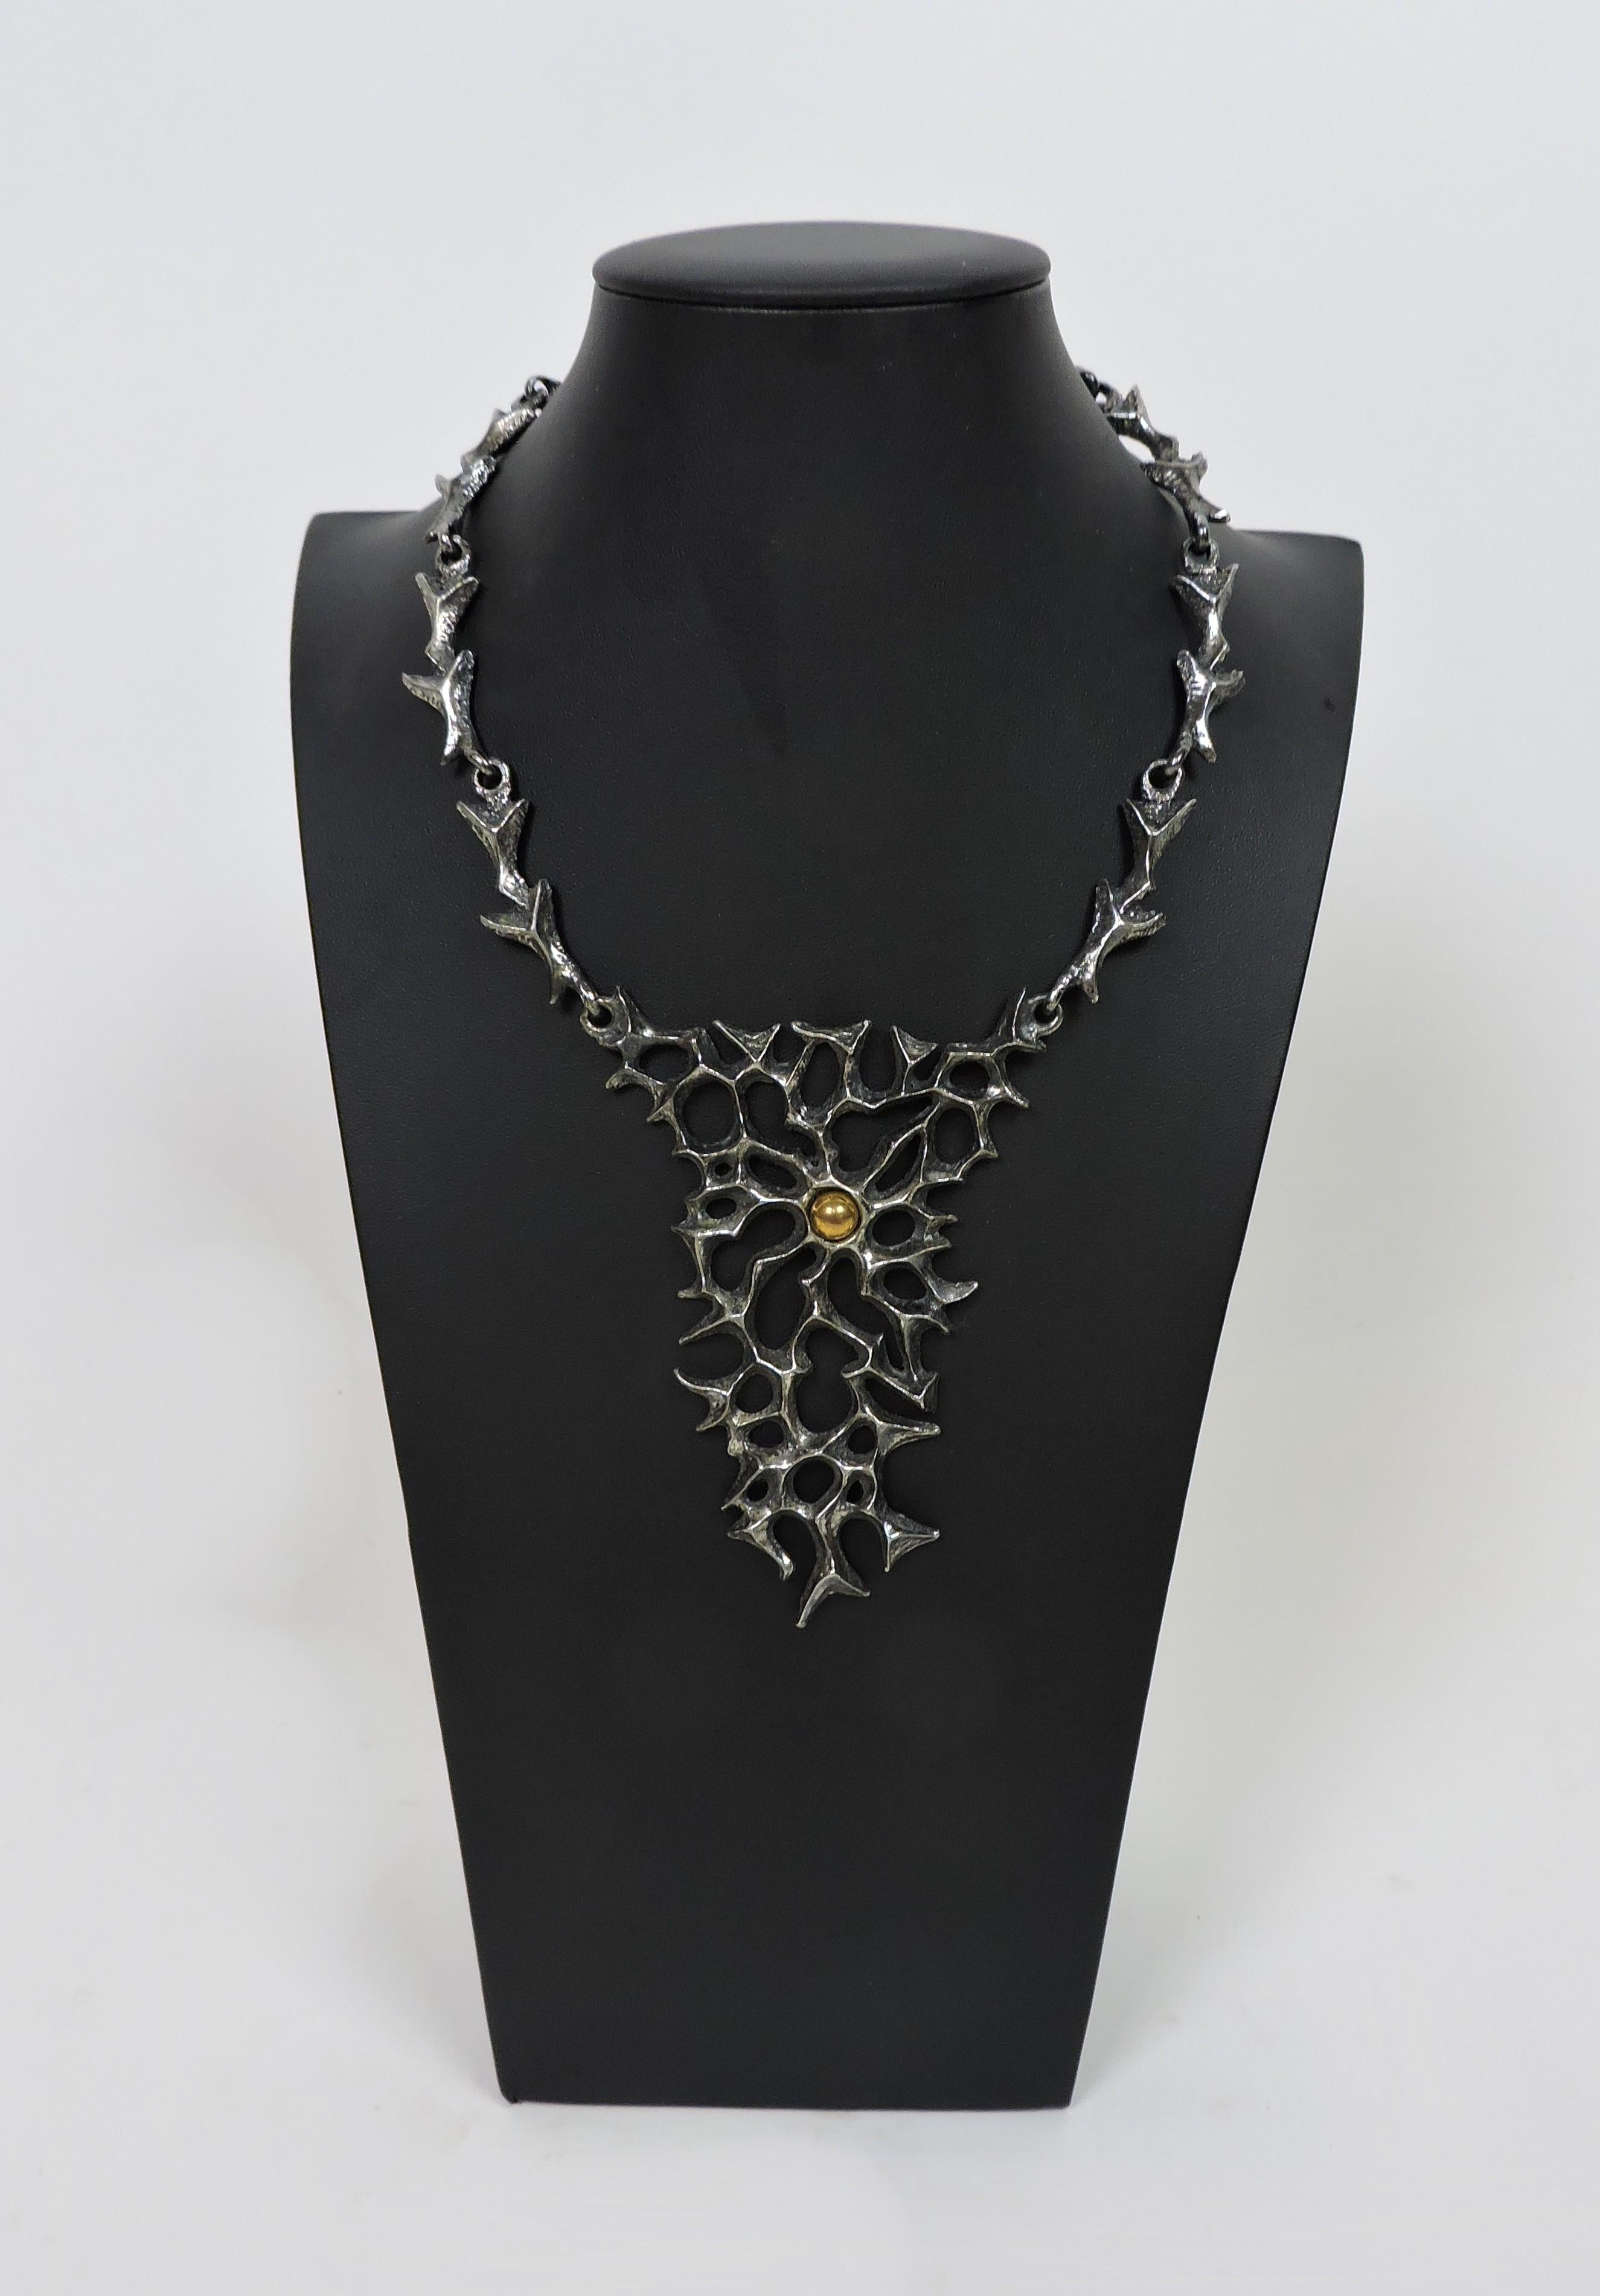 Striking large and dramatic brutalist style sculptural necklace by acclaimed Canadian jewelry artist, Robert Larin. Made of hand cast pewter and signed Robert Larin on the back.

From Bidsquare:
Robert Larin was creating pewter jewelry as early as